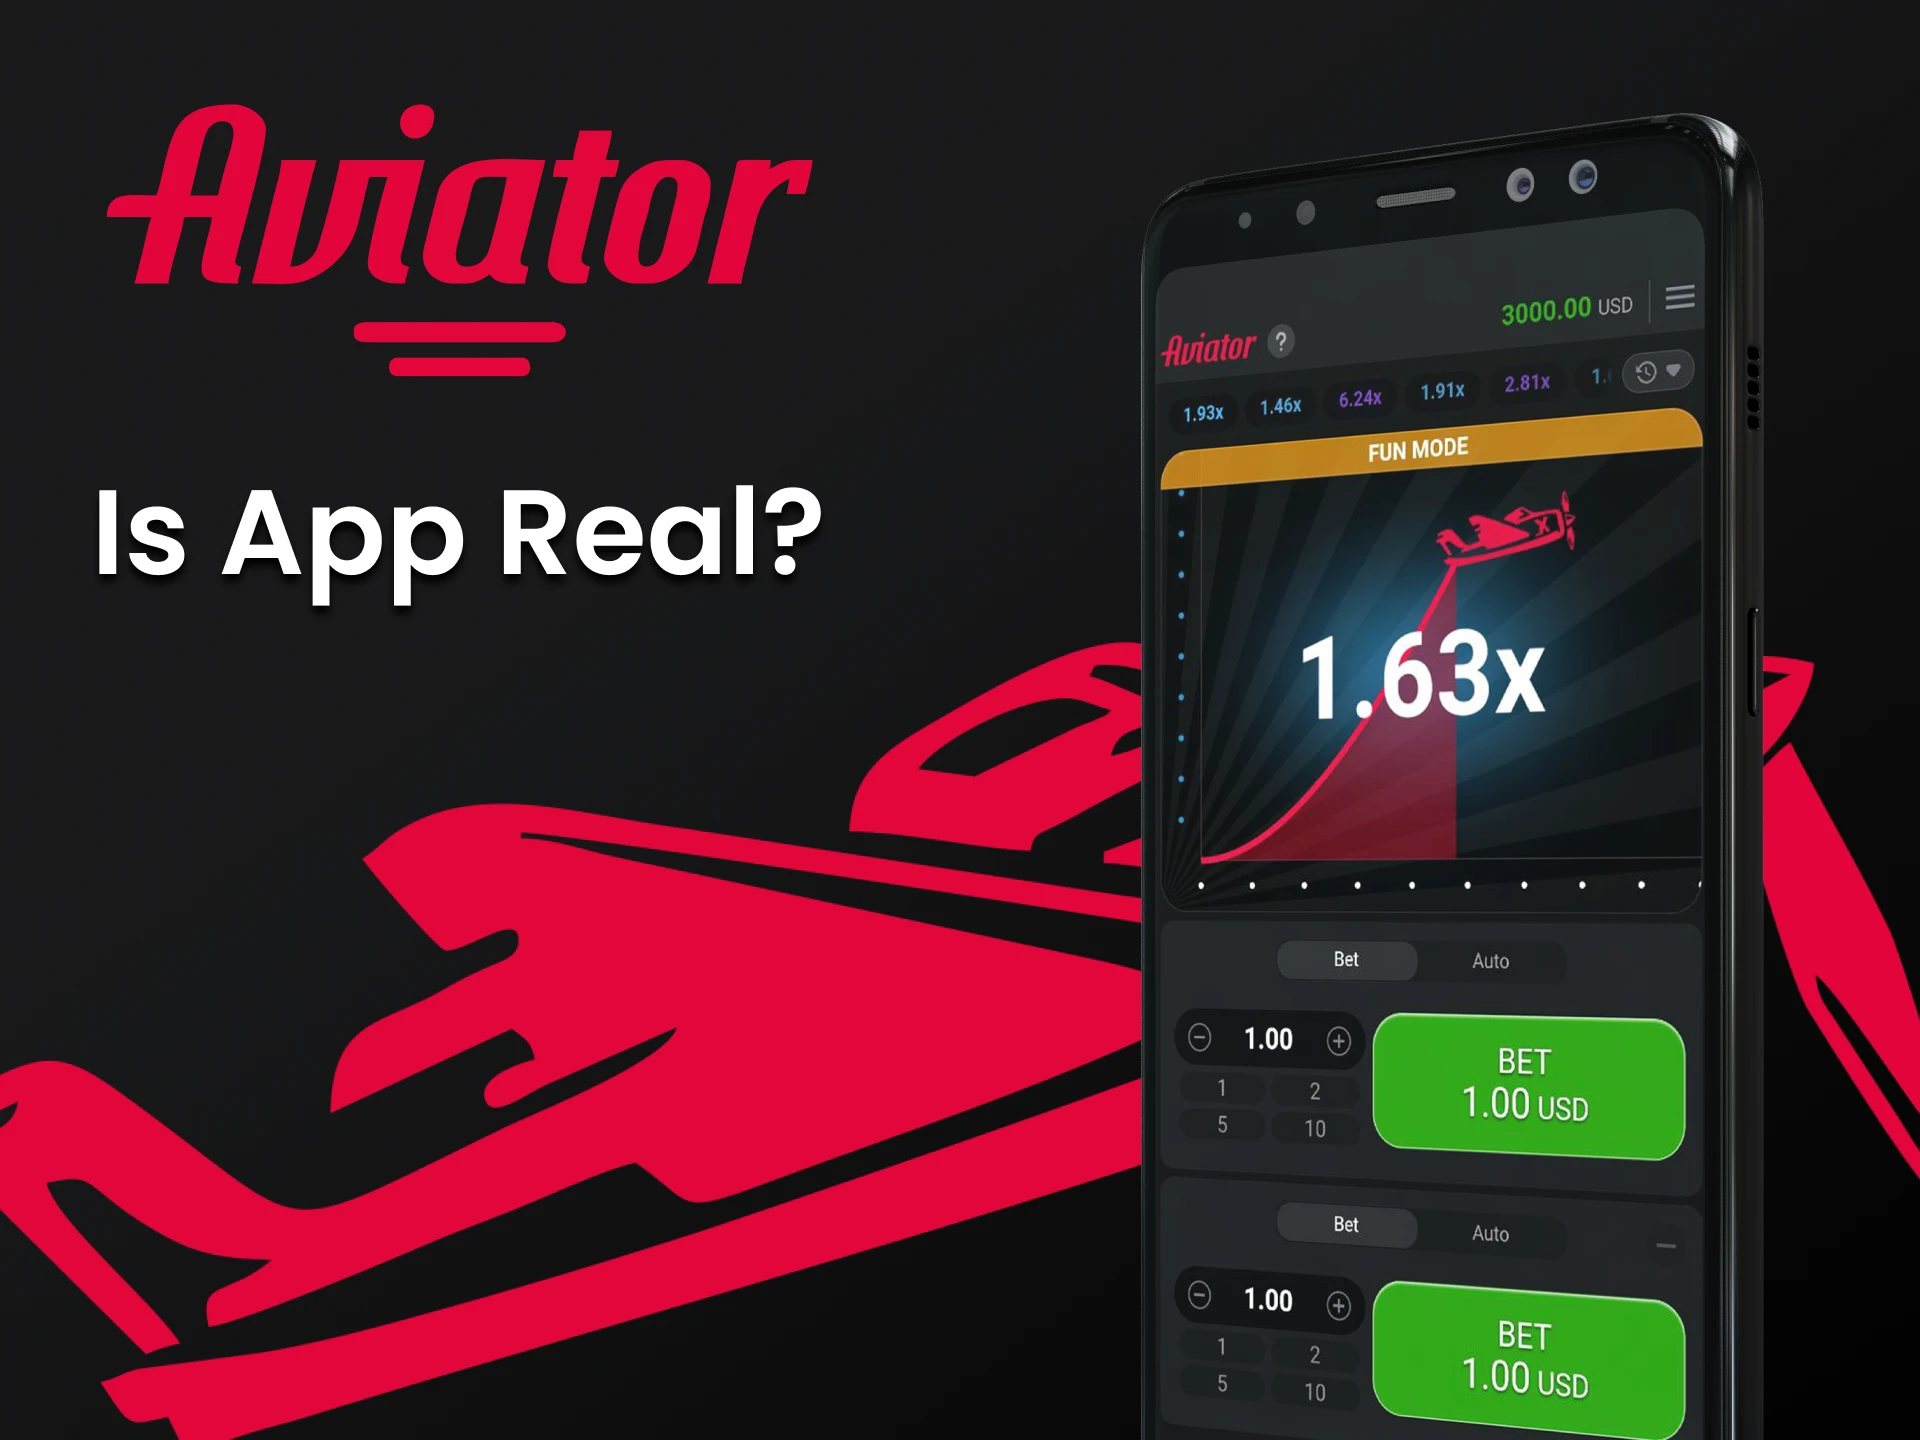 You can play Aviator through your smartphone.